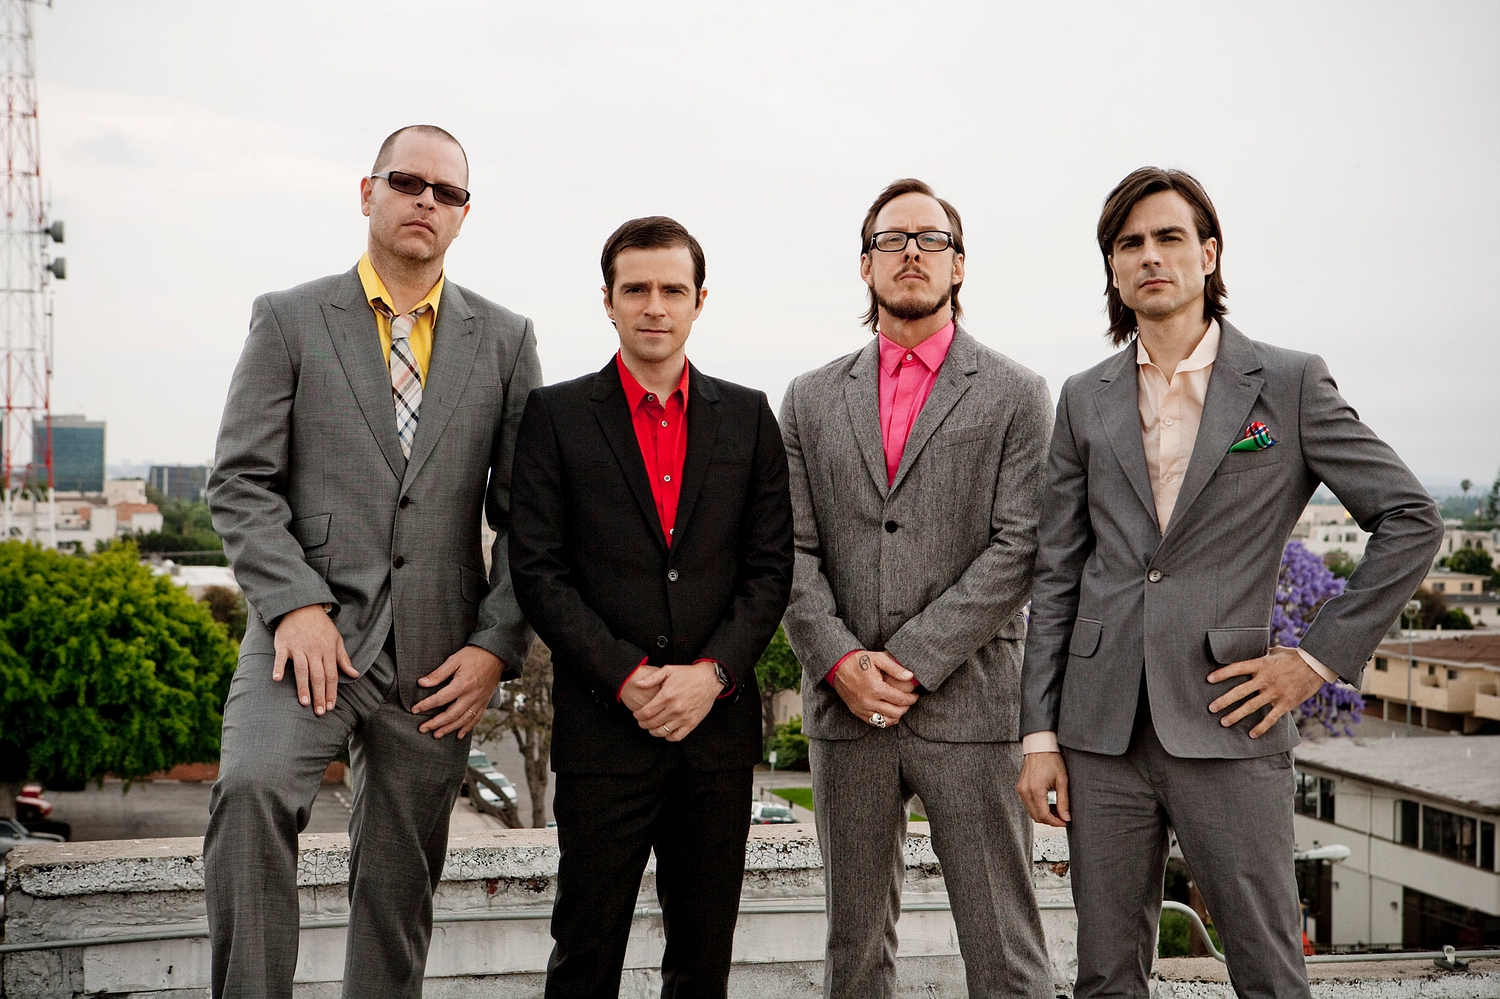 Weezer: "We want to have it all"